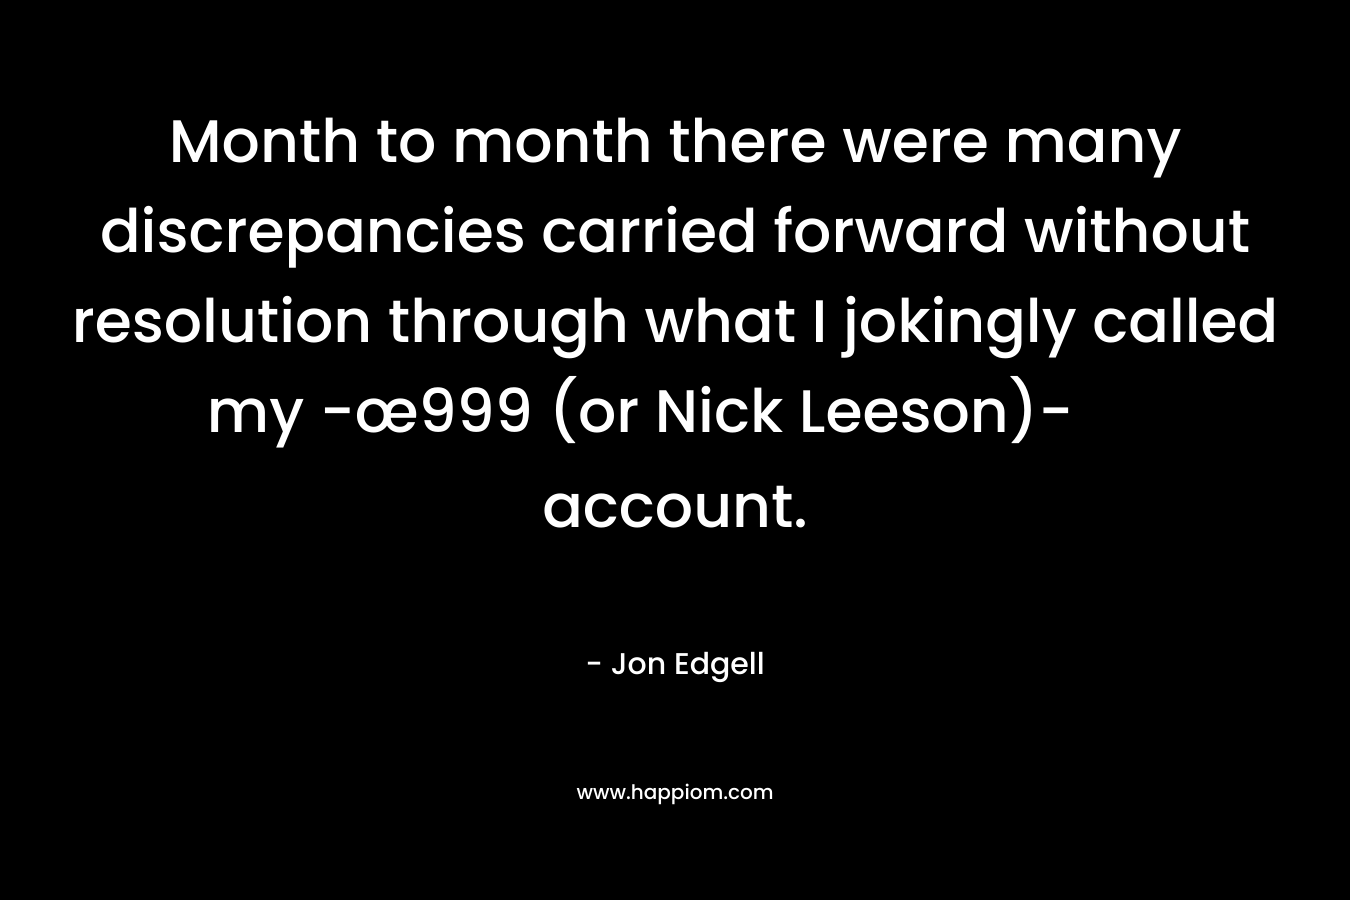 Month to month there were many discrepancies carried forward without resolution through what I jokingly called my -œ999 (or Nick Leeson)- account.